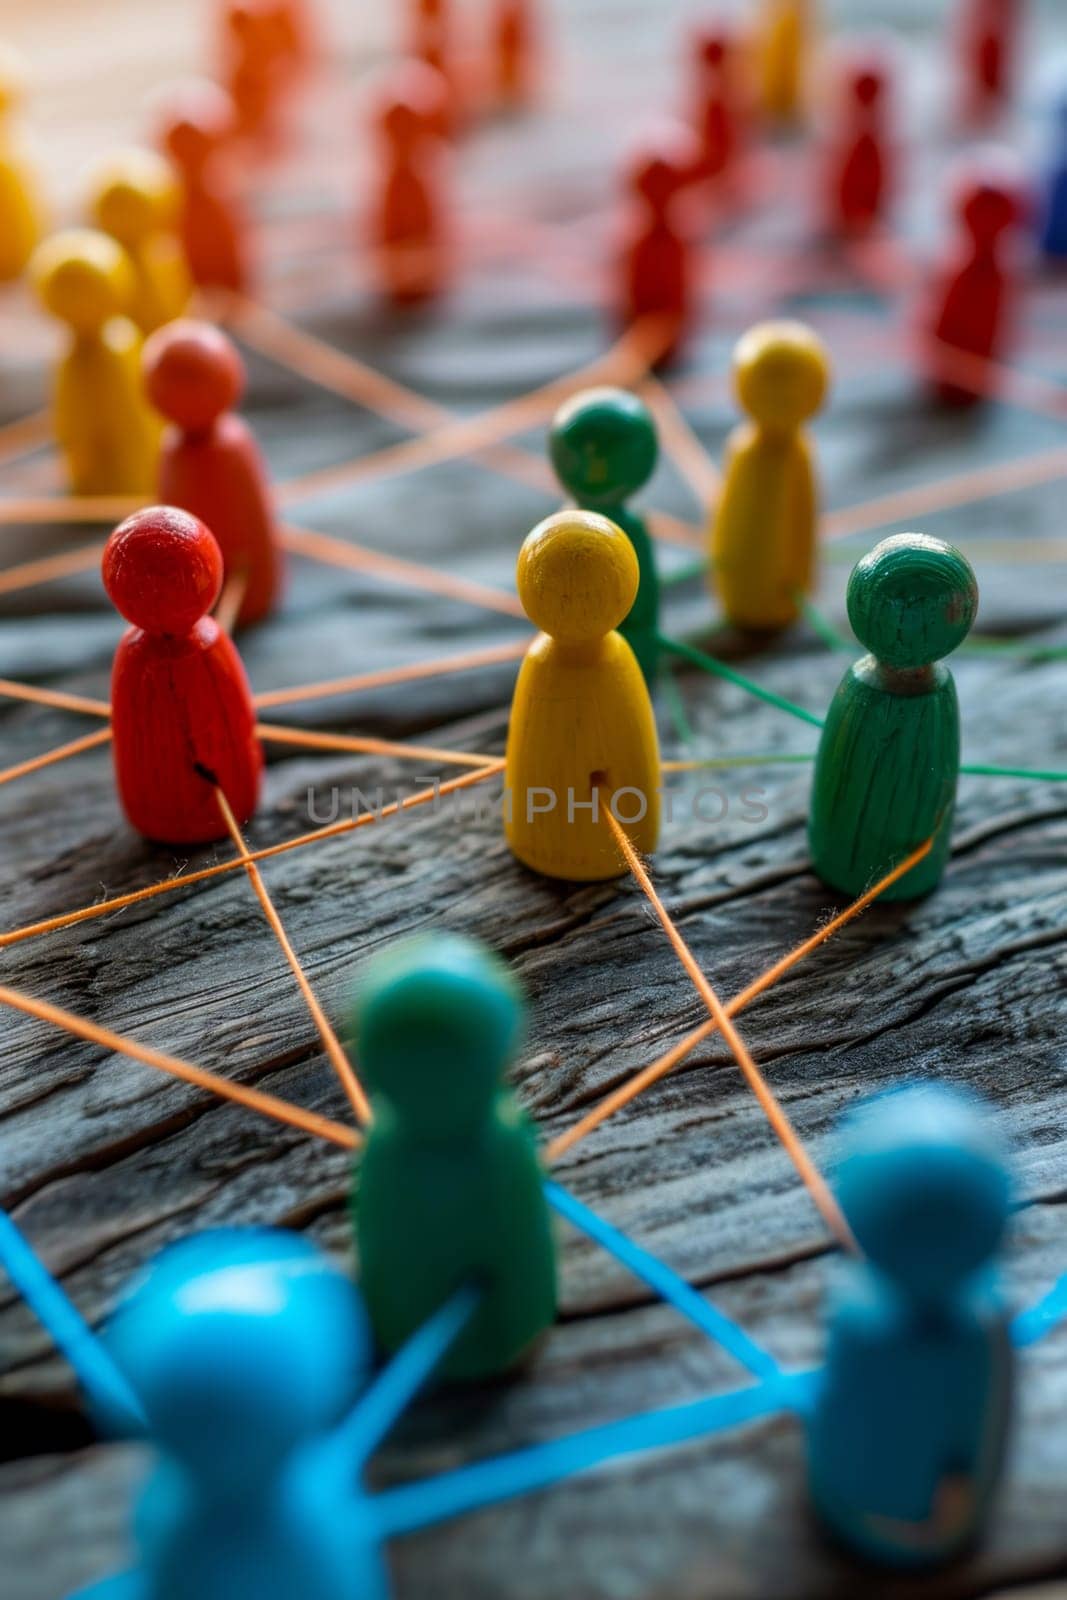 the social network community team. The concept of connections between people by Lobachad